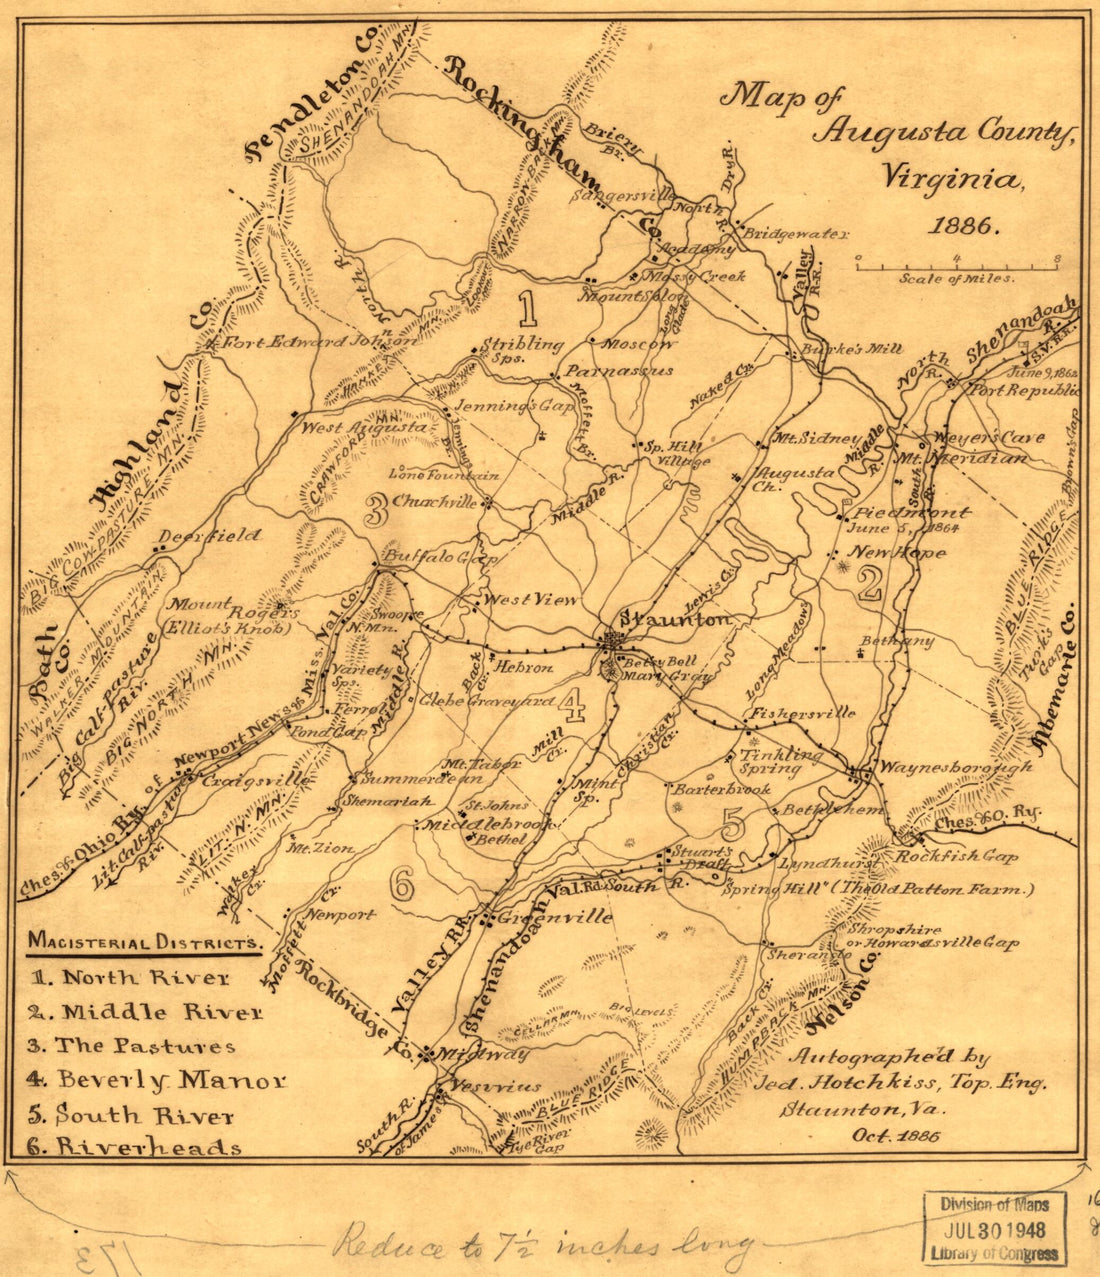 This old map of Map of Augusta County, Virginia, from 1886 was created by Jedediah Hotchkiss in 1886